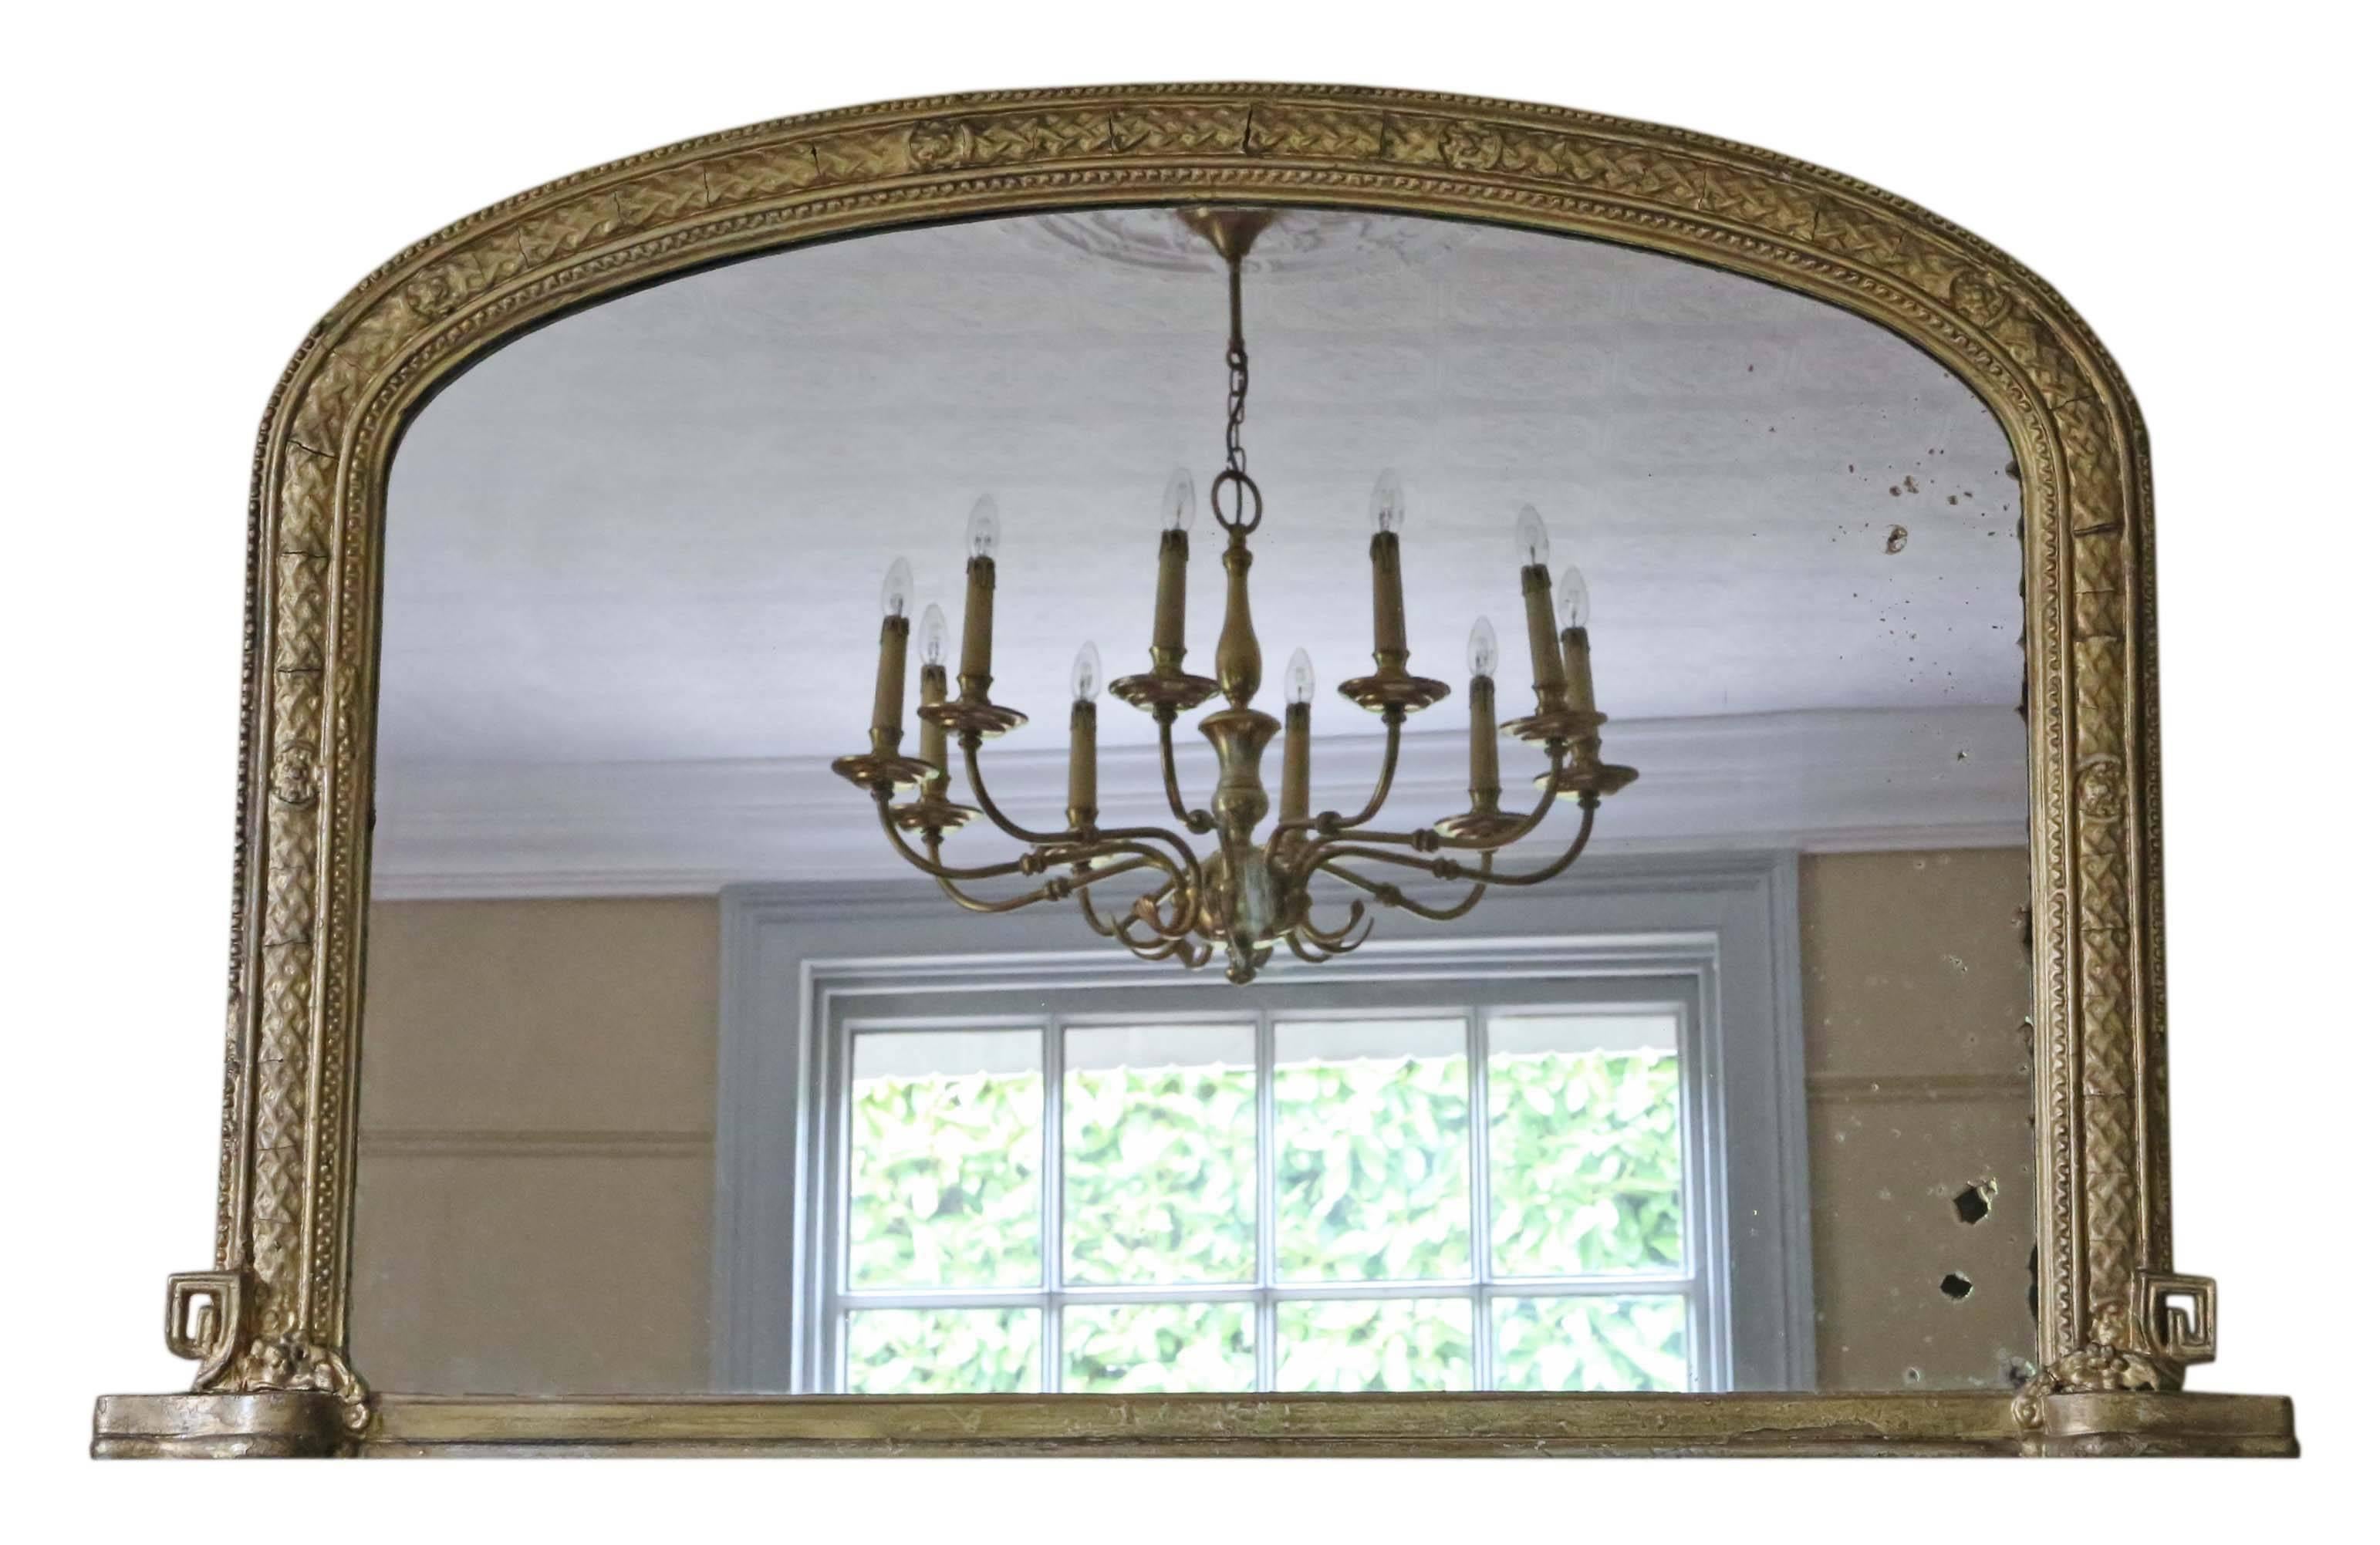 Antique Victorian gilt wall mirror or overmantle, circa 1880

This is a lovely mirror, that is full of age, charm and character no woodworm.

Would look good in the right location.

The mirror is in good condition with light oxidation (as most